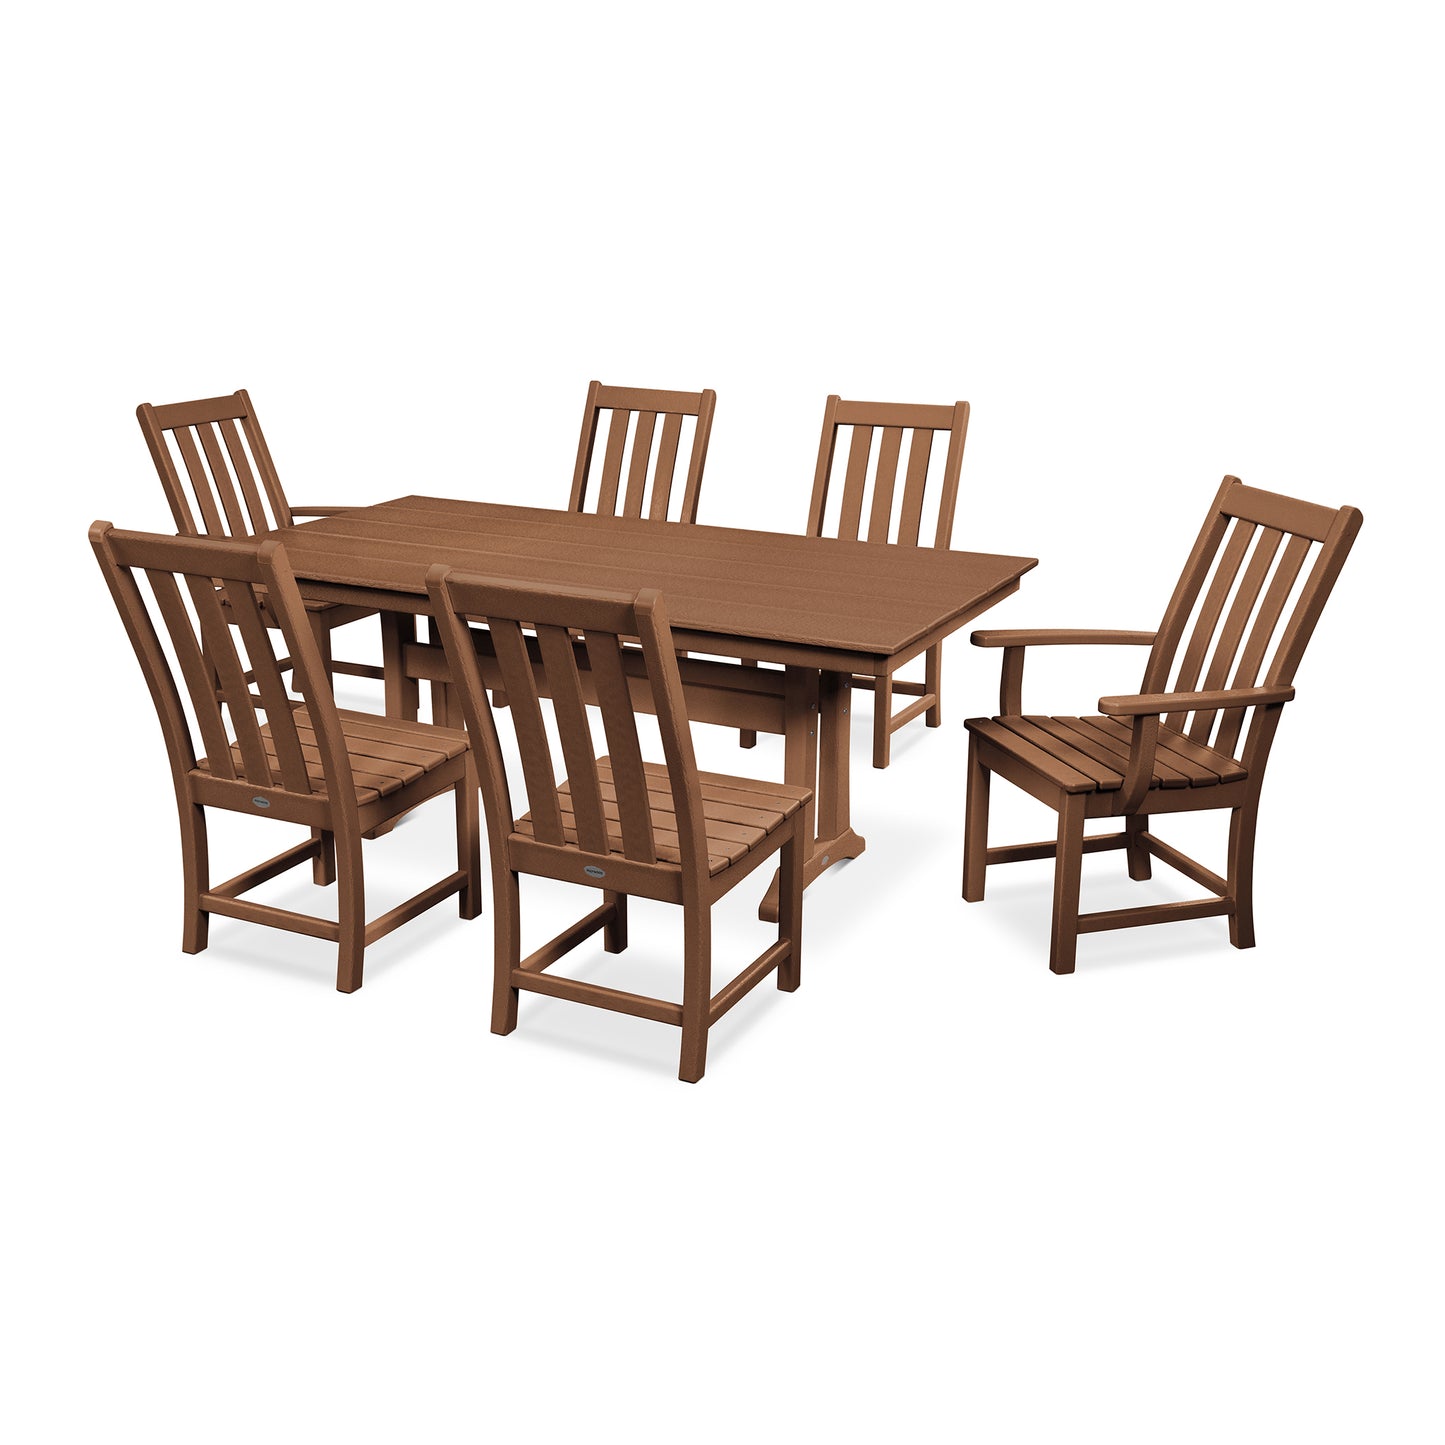 A set of brown, POLYWOOD Vineyard 7-Piece Farmhouse Trestle Dining Set featuring a large rectangular table and six matching chairs with vertical slat backs, arranged on a white background.